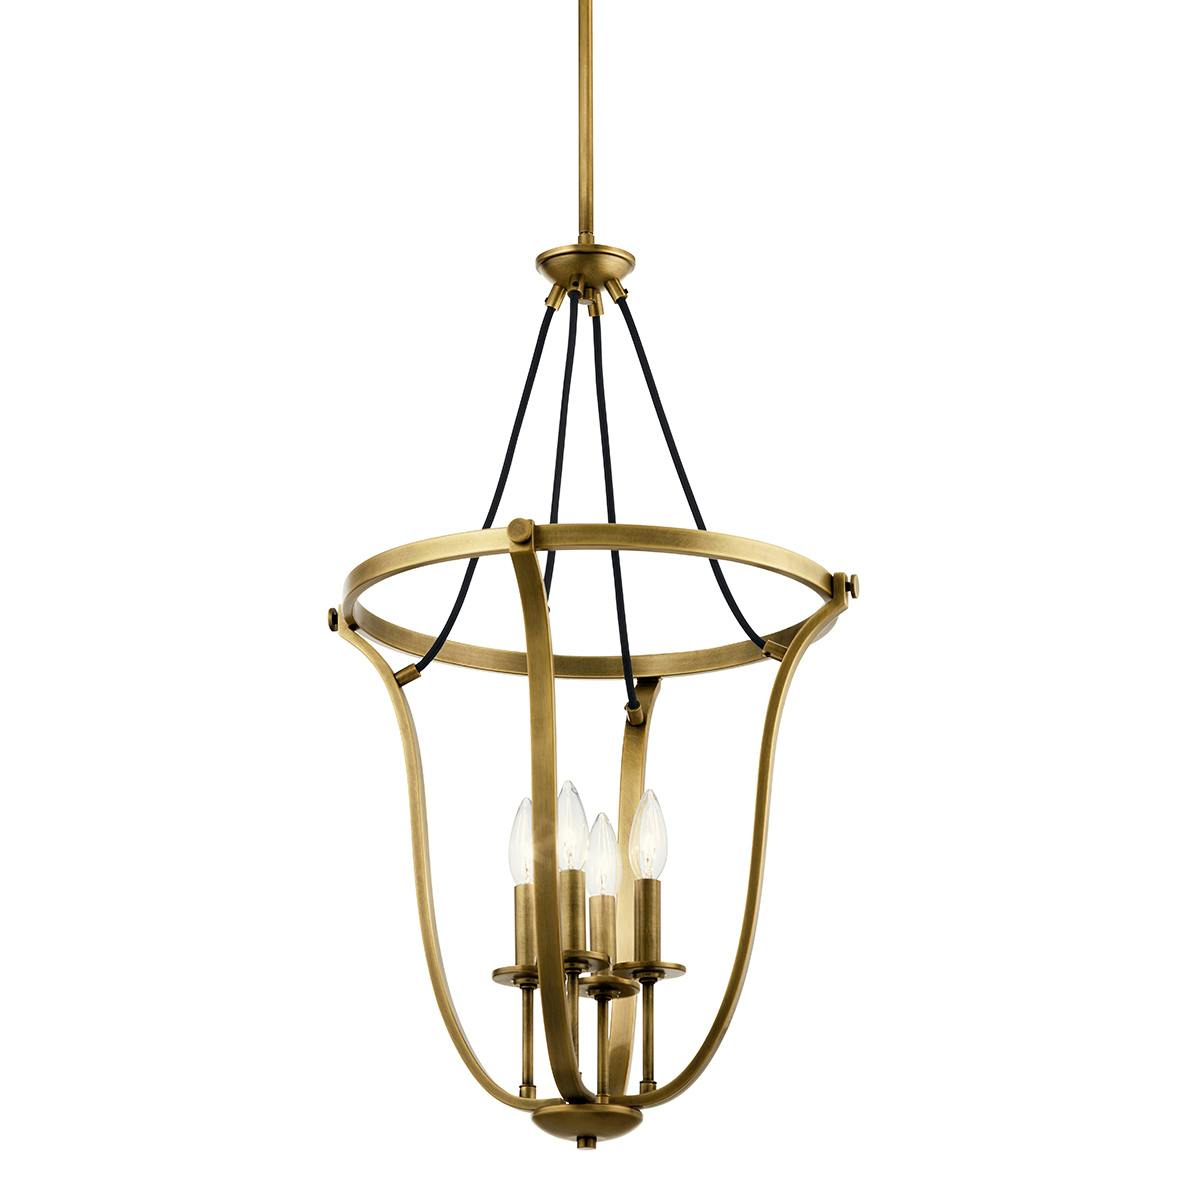 Close up view of the Thisbe 29.25" 4 Light Foyer Pendant Brass on a white background